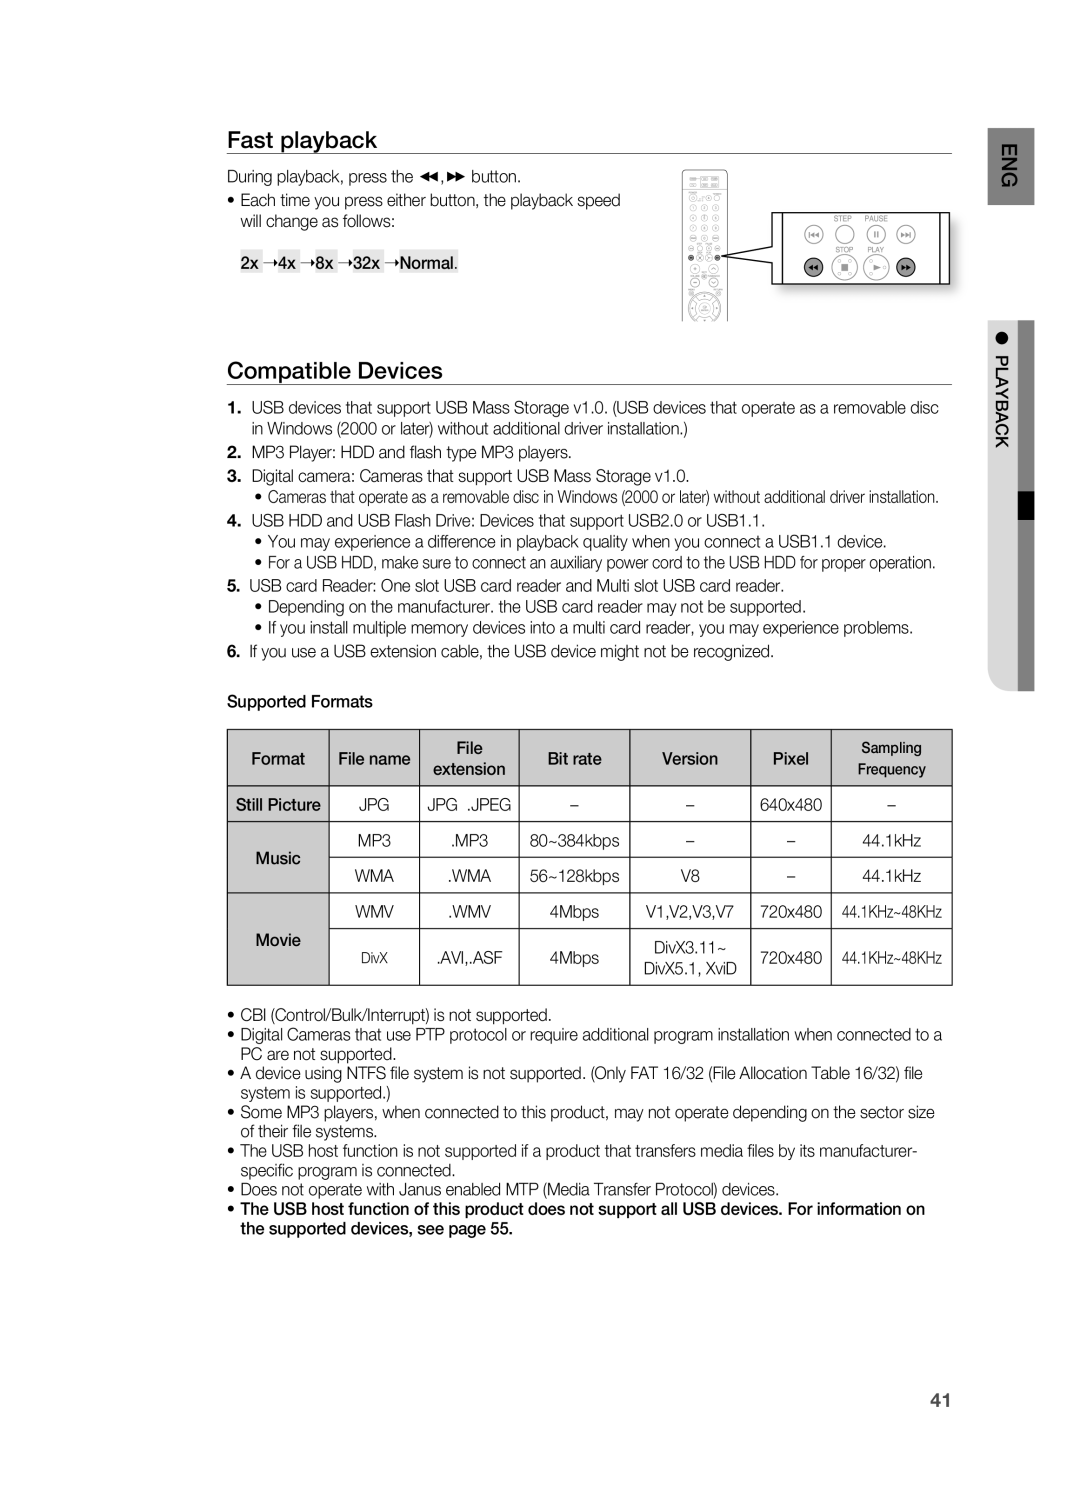 Samsung HT-X710 user manual Fast playback, Compatible Devices 